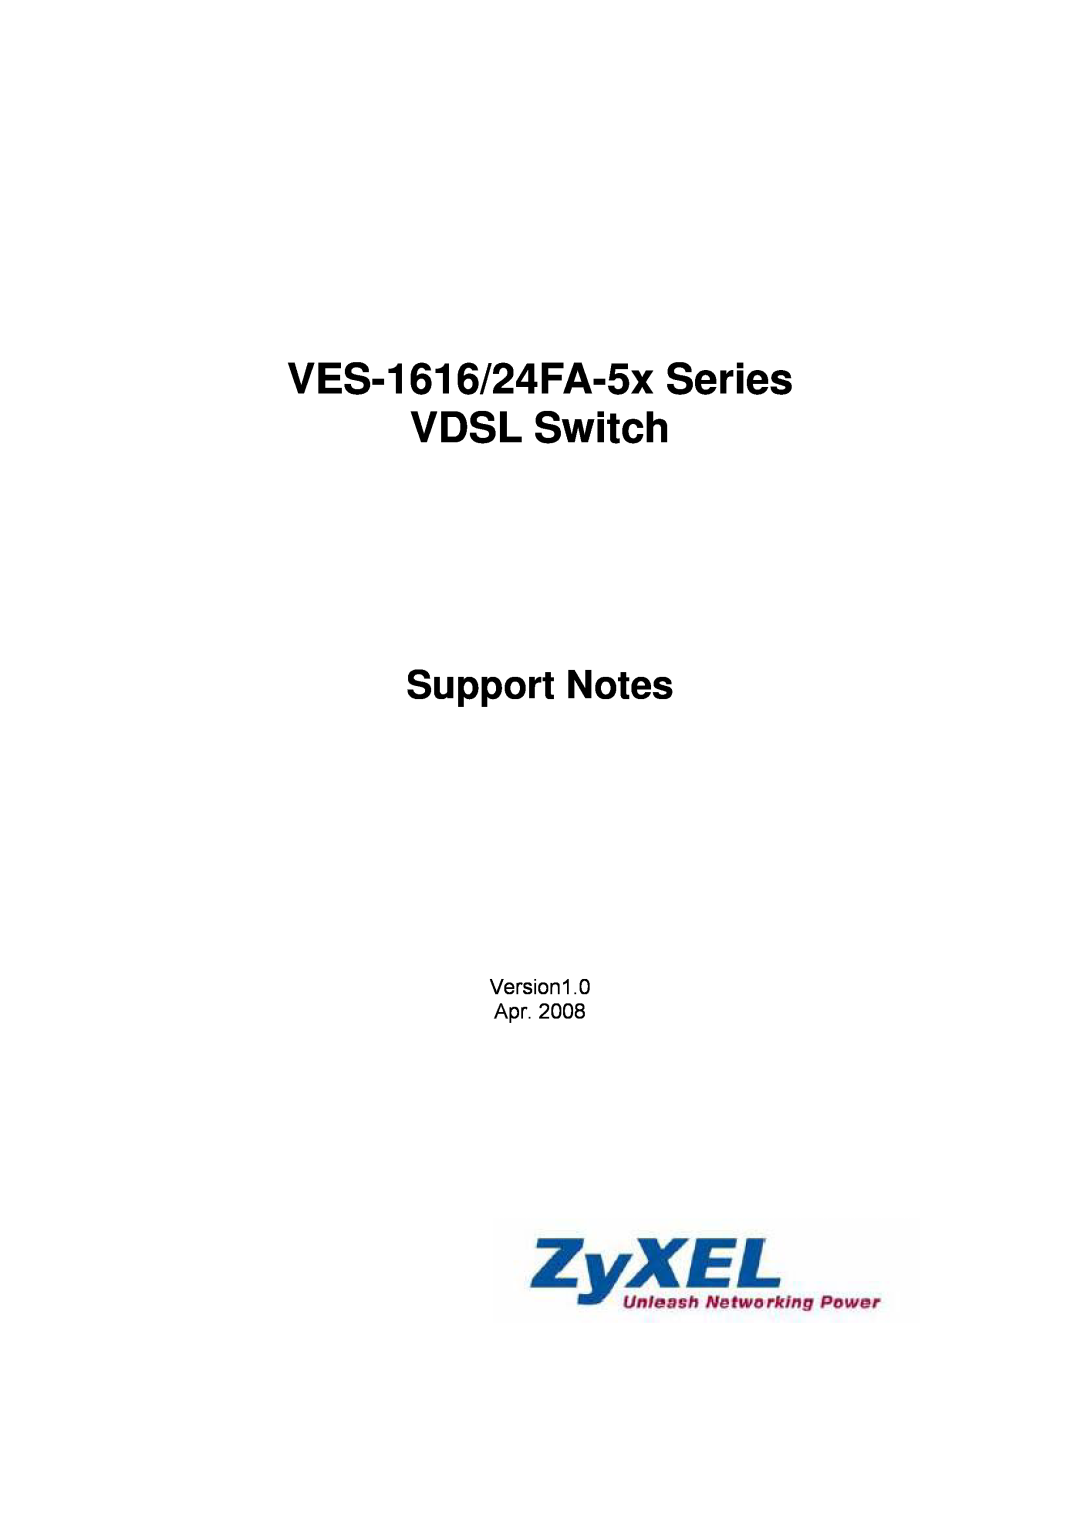 ZyXEL Communications manual VES-1616/24FA-5x Series VDSL Switch, Support Notes 